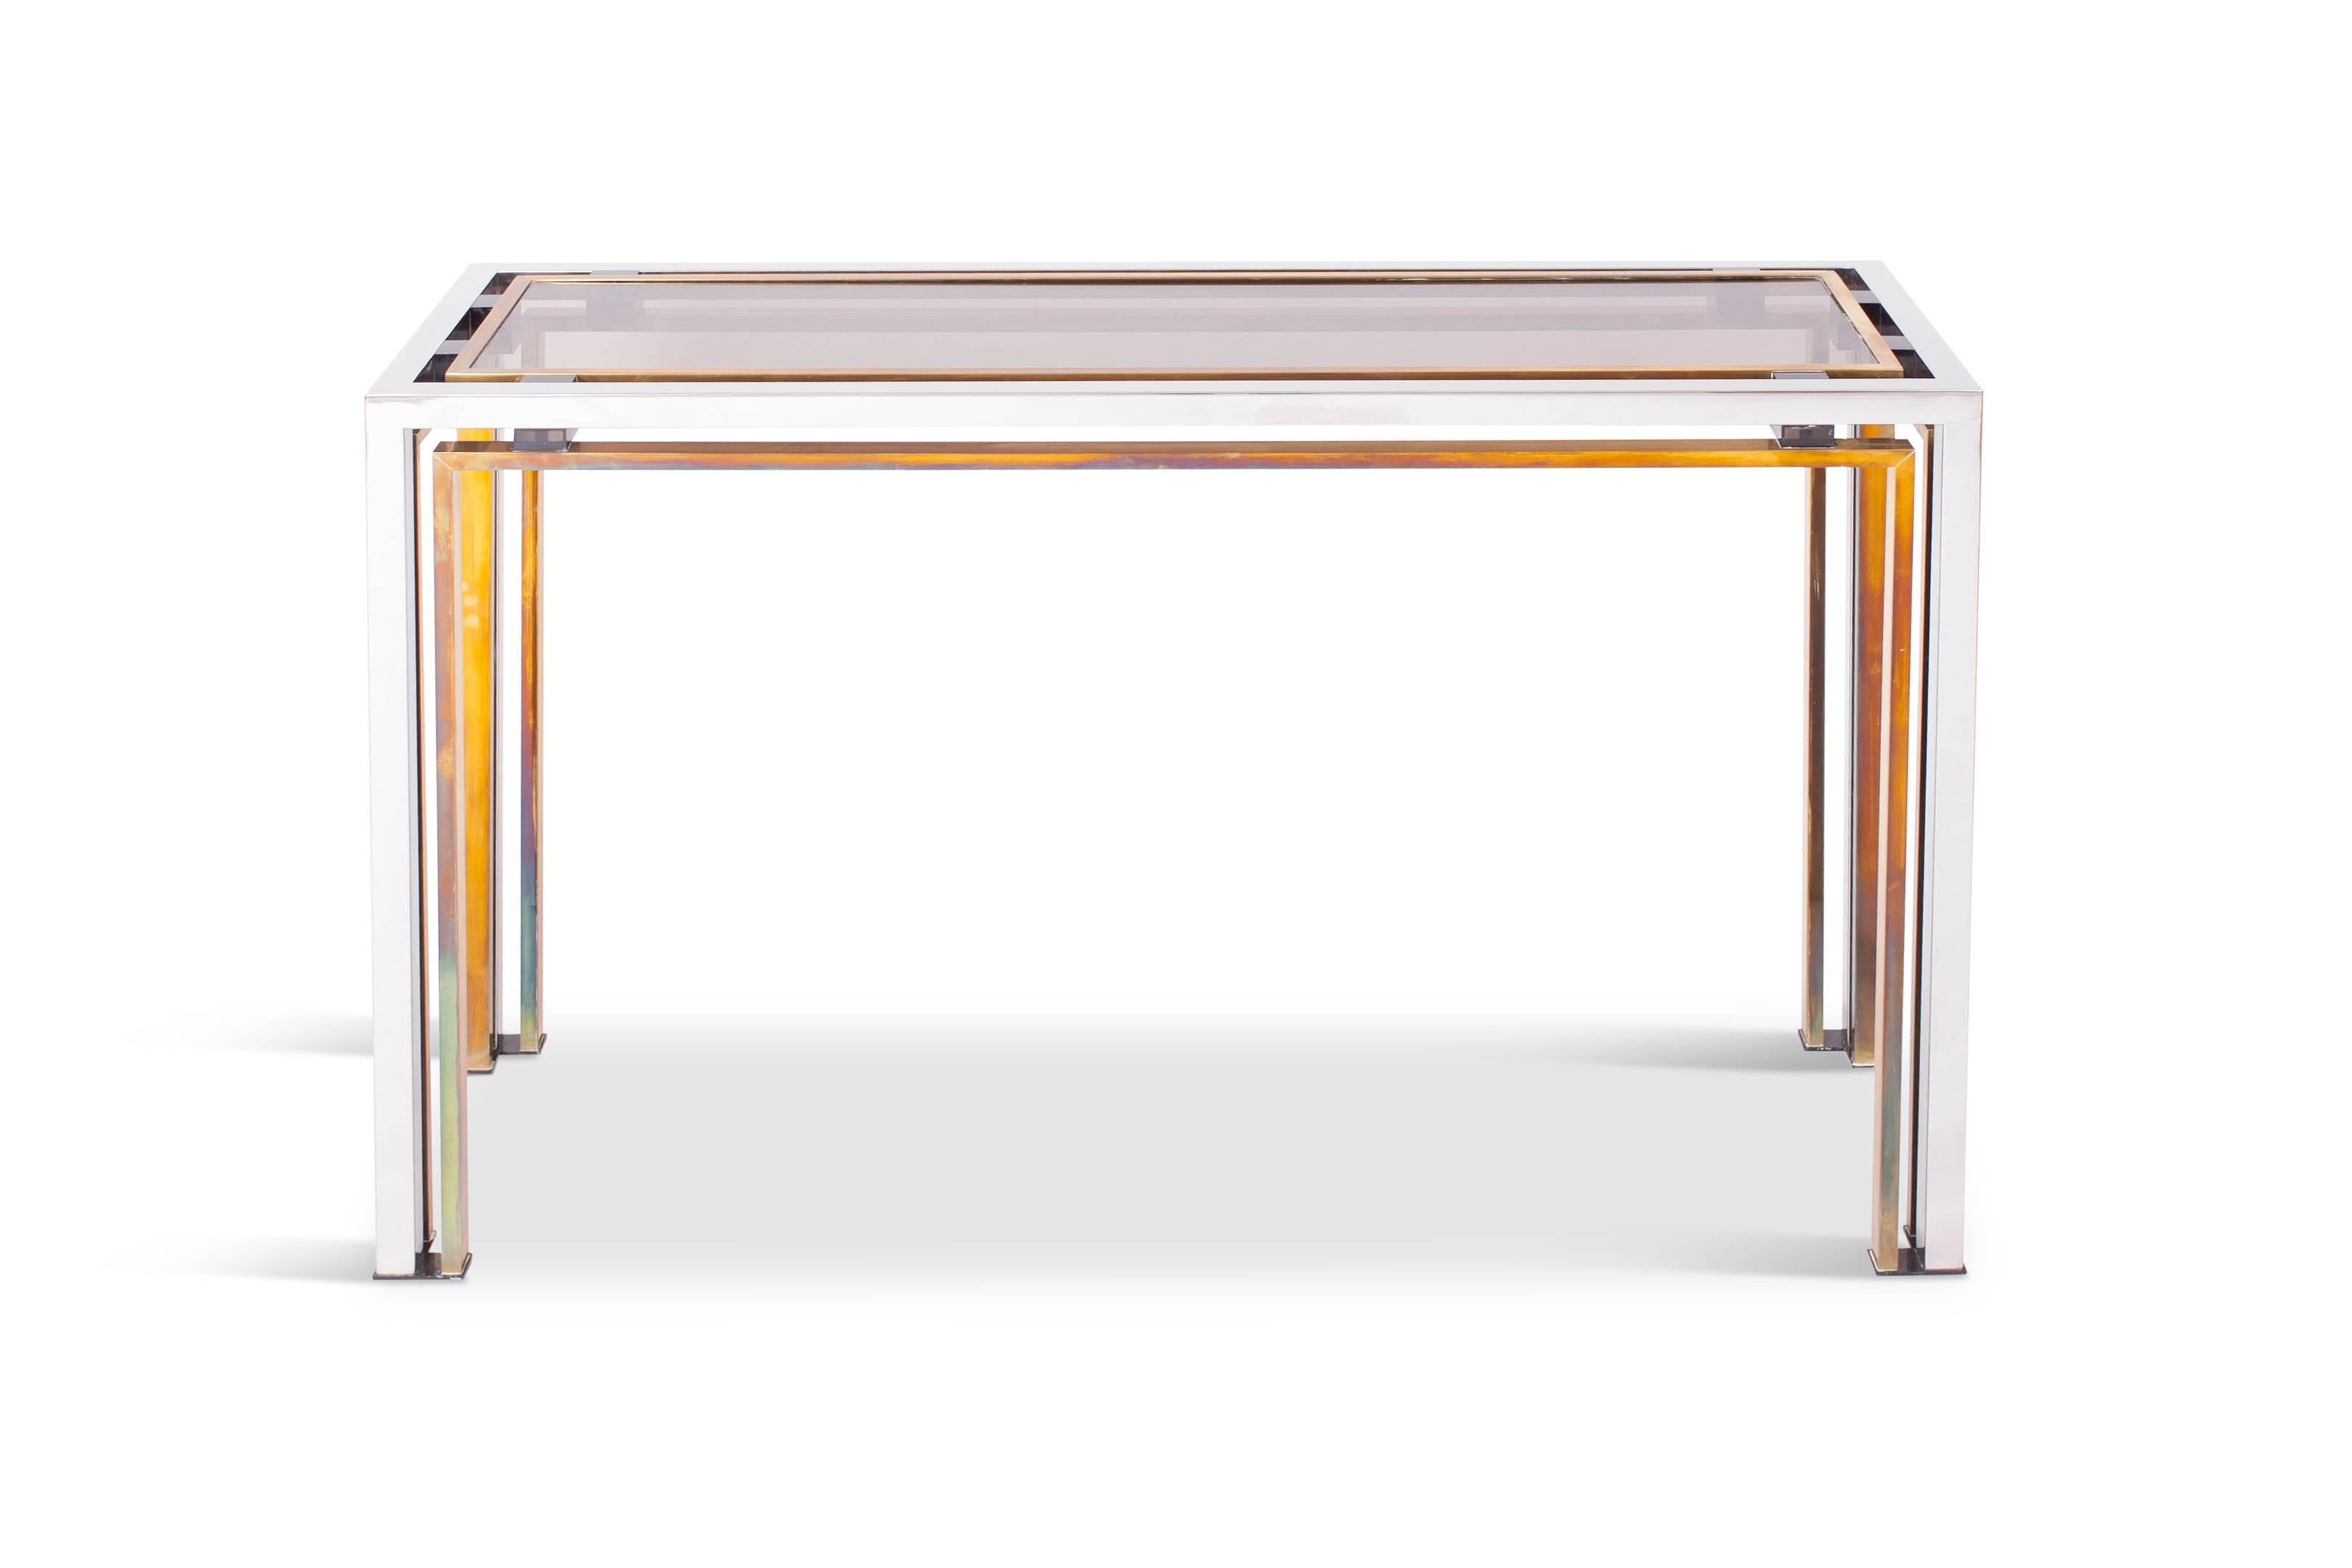 Hollywood Regency Mid-Century Modern console table by Italian designer Rome Rega, Italy, the 1970s.

The sculptural chrome and brass frame is contrasting nicely with the smoked glass top which is held in place with purple perspex